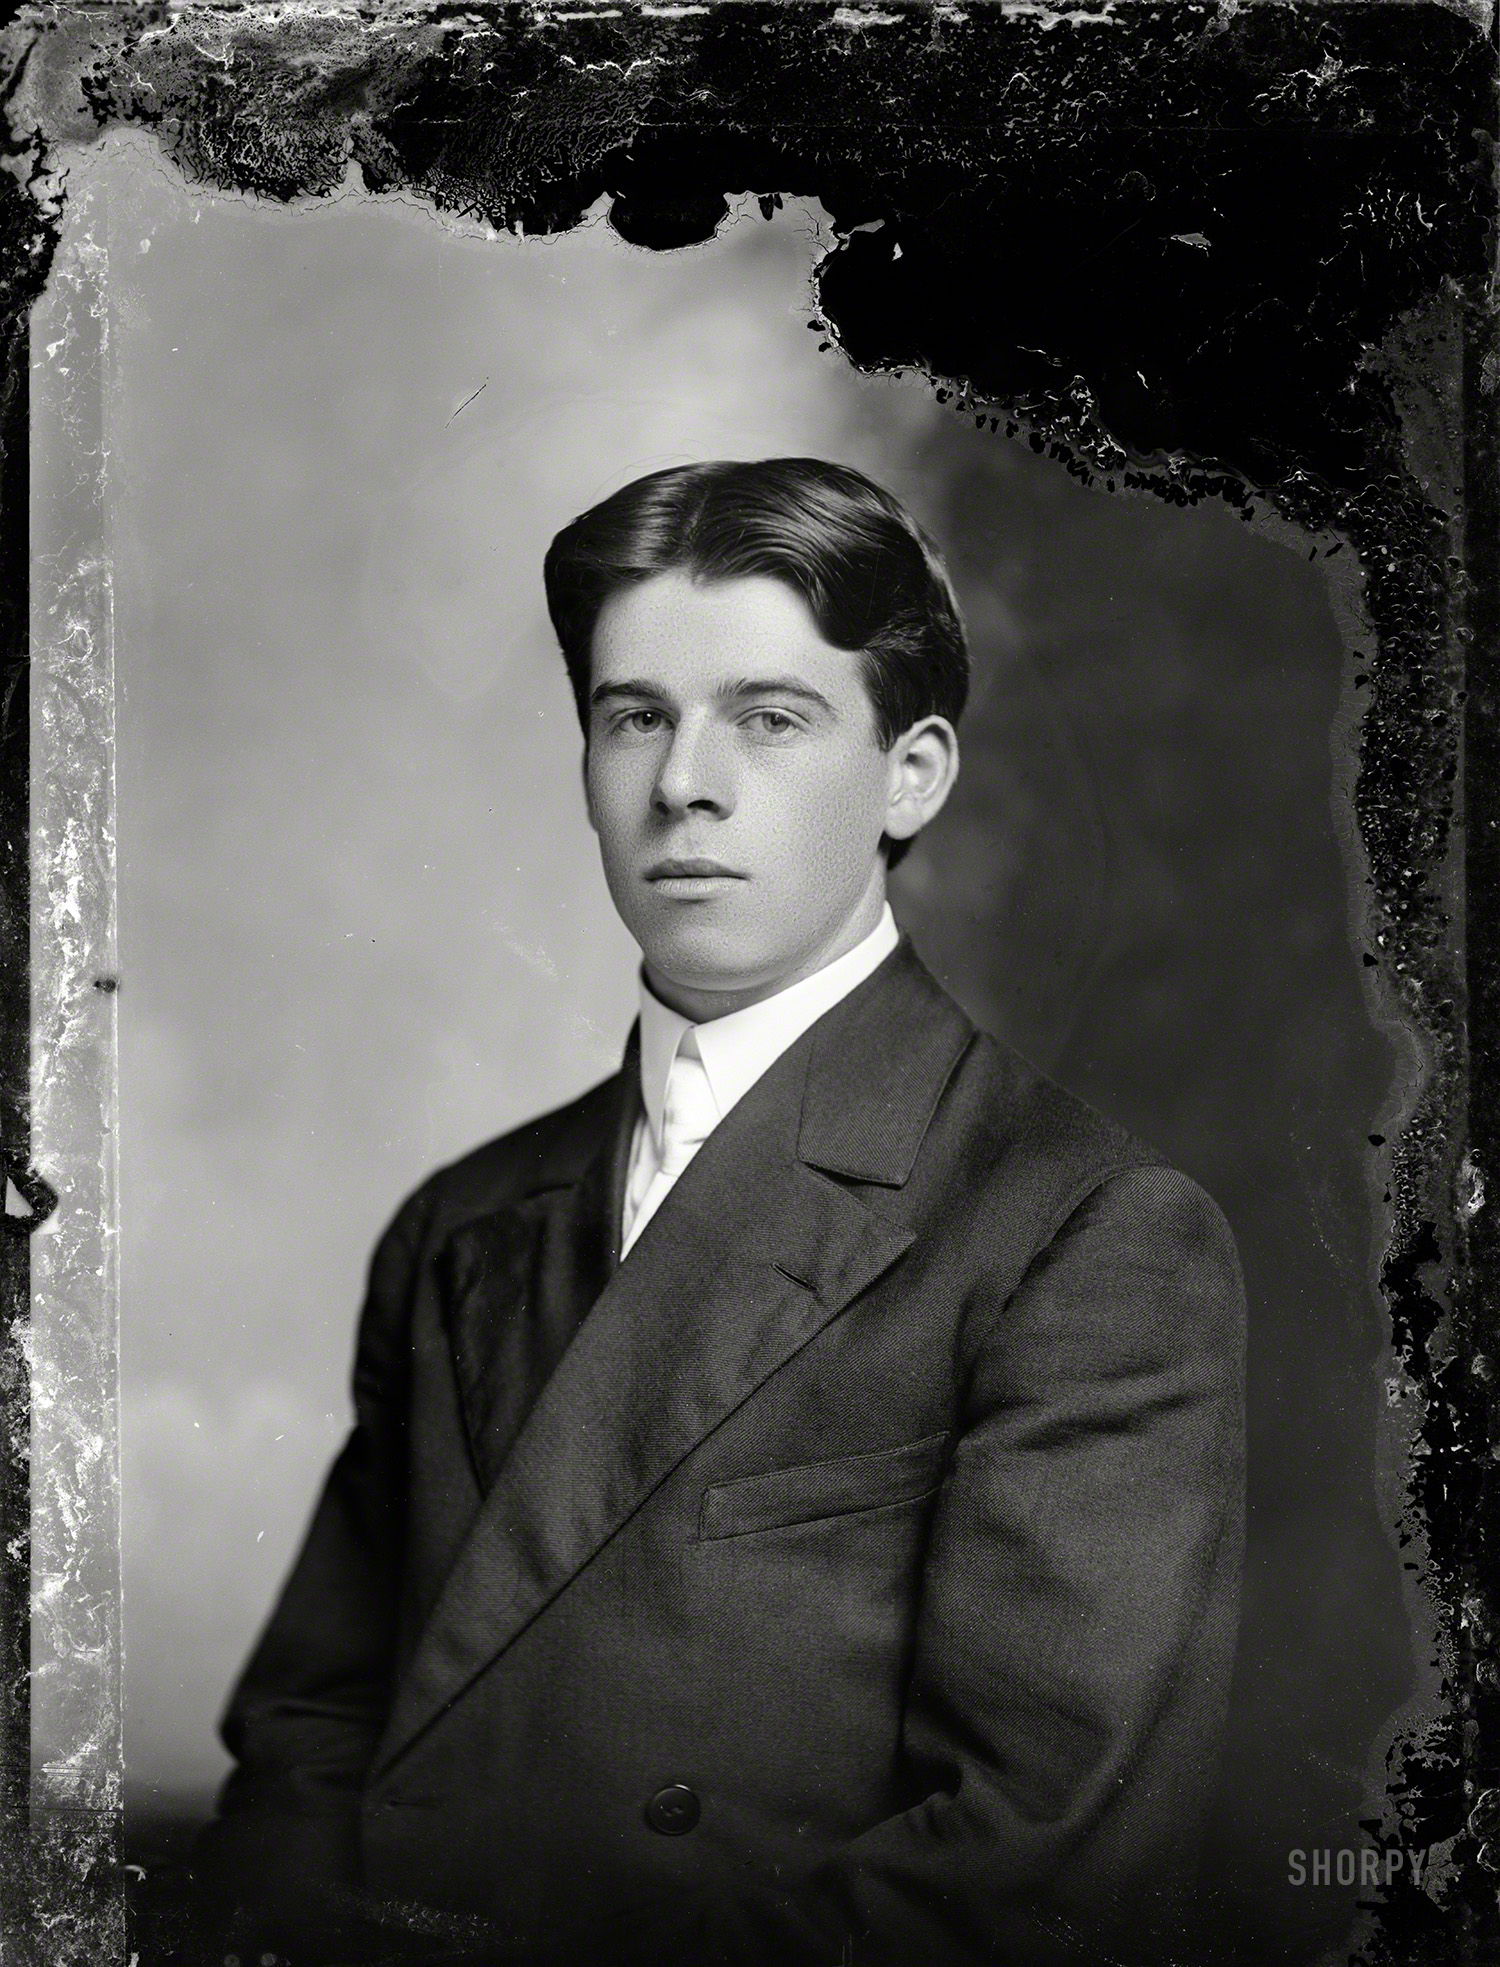 "Kelly, W.E. -- between March 1905 and August 1906." 5x7 glass negative from the C.M. Bell portrait studio in Washington, D.C. View full size.